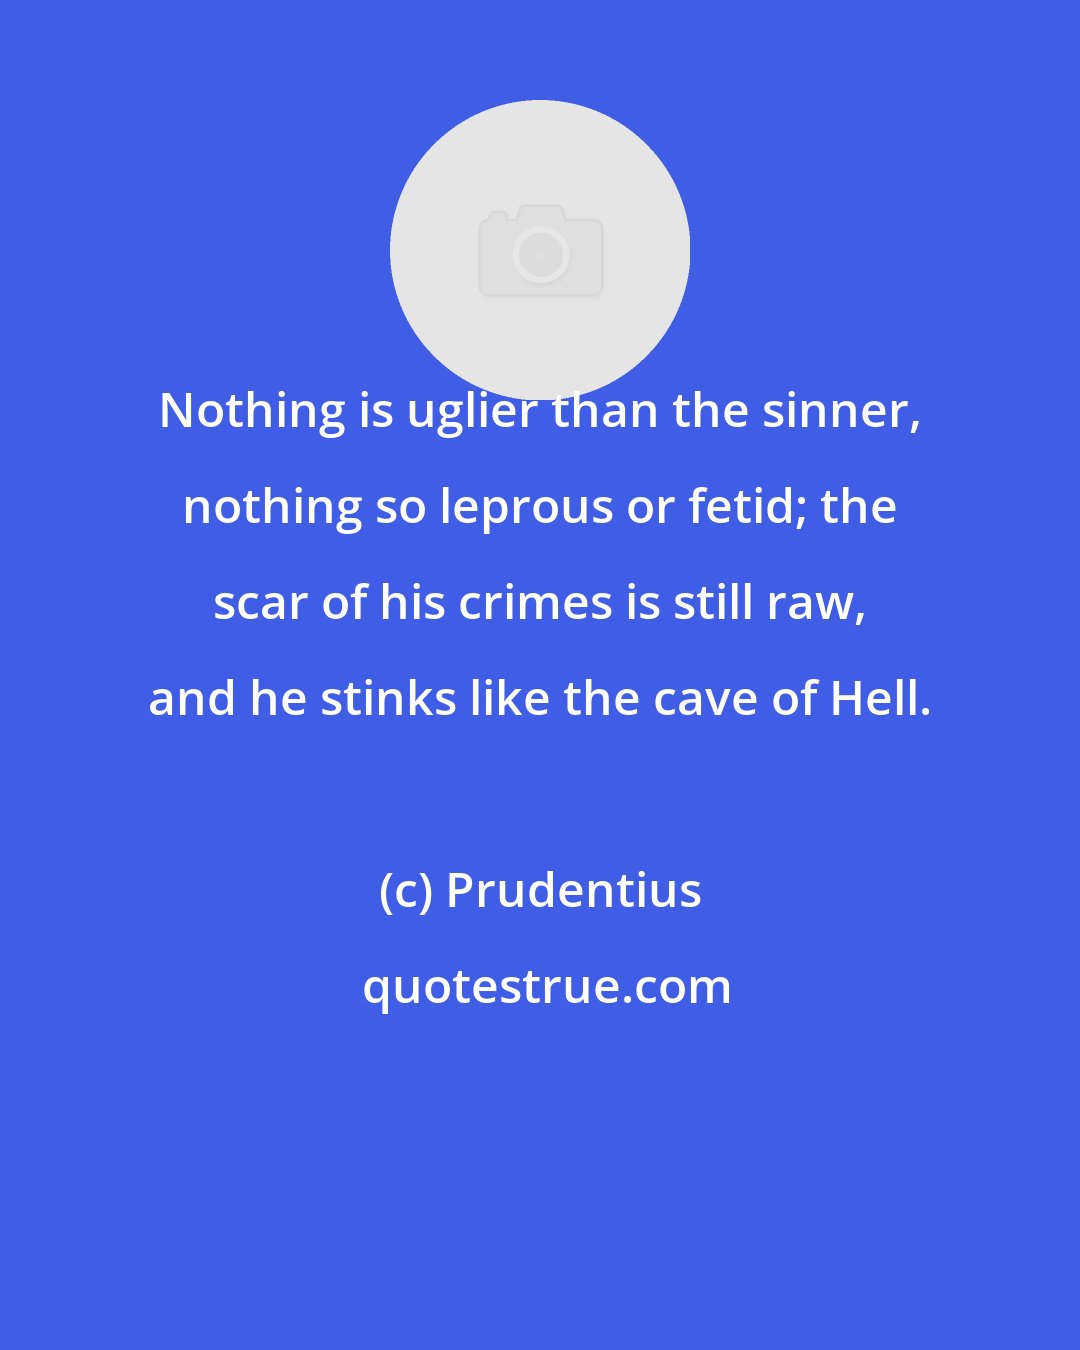 Prudentius: Nothing is uglier than the sinner, nothing so leprous or fetid; the scar of his crimes is still raw, and he stinks like the cave of Hell.